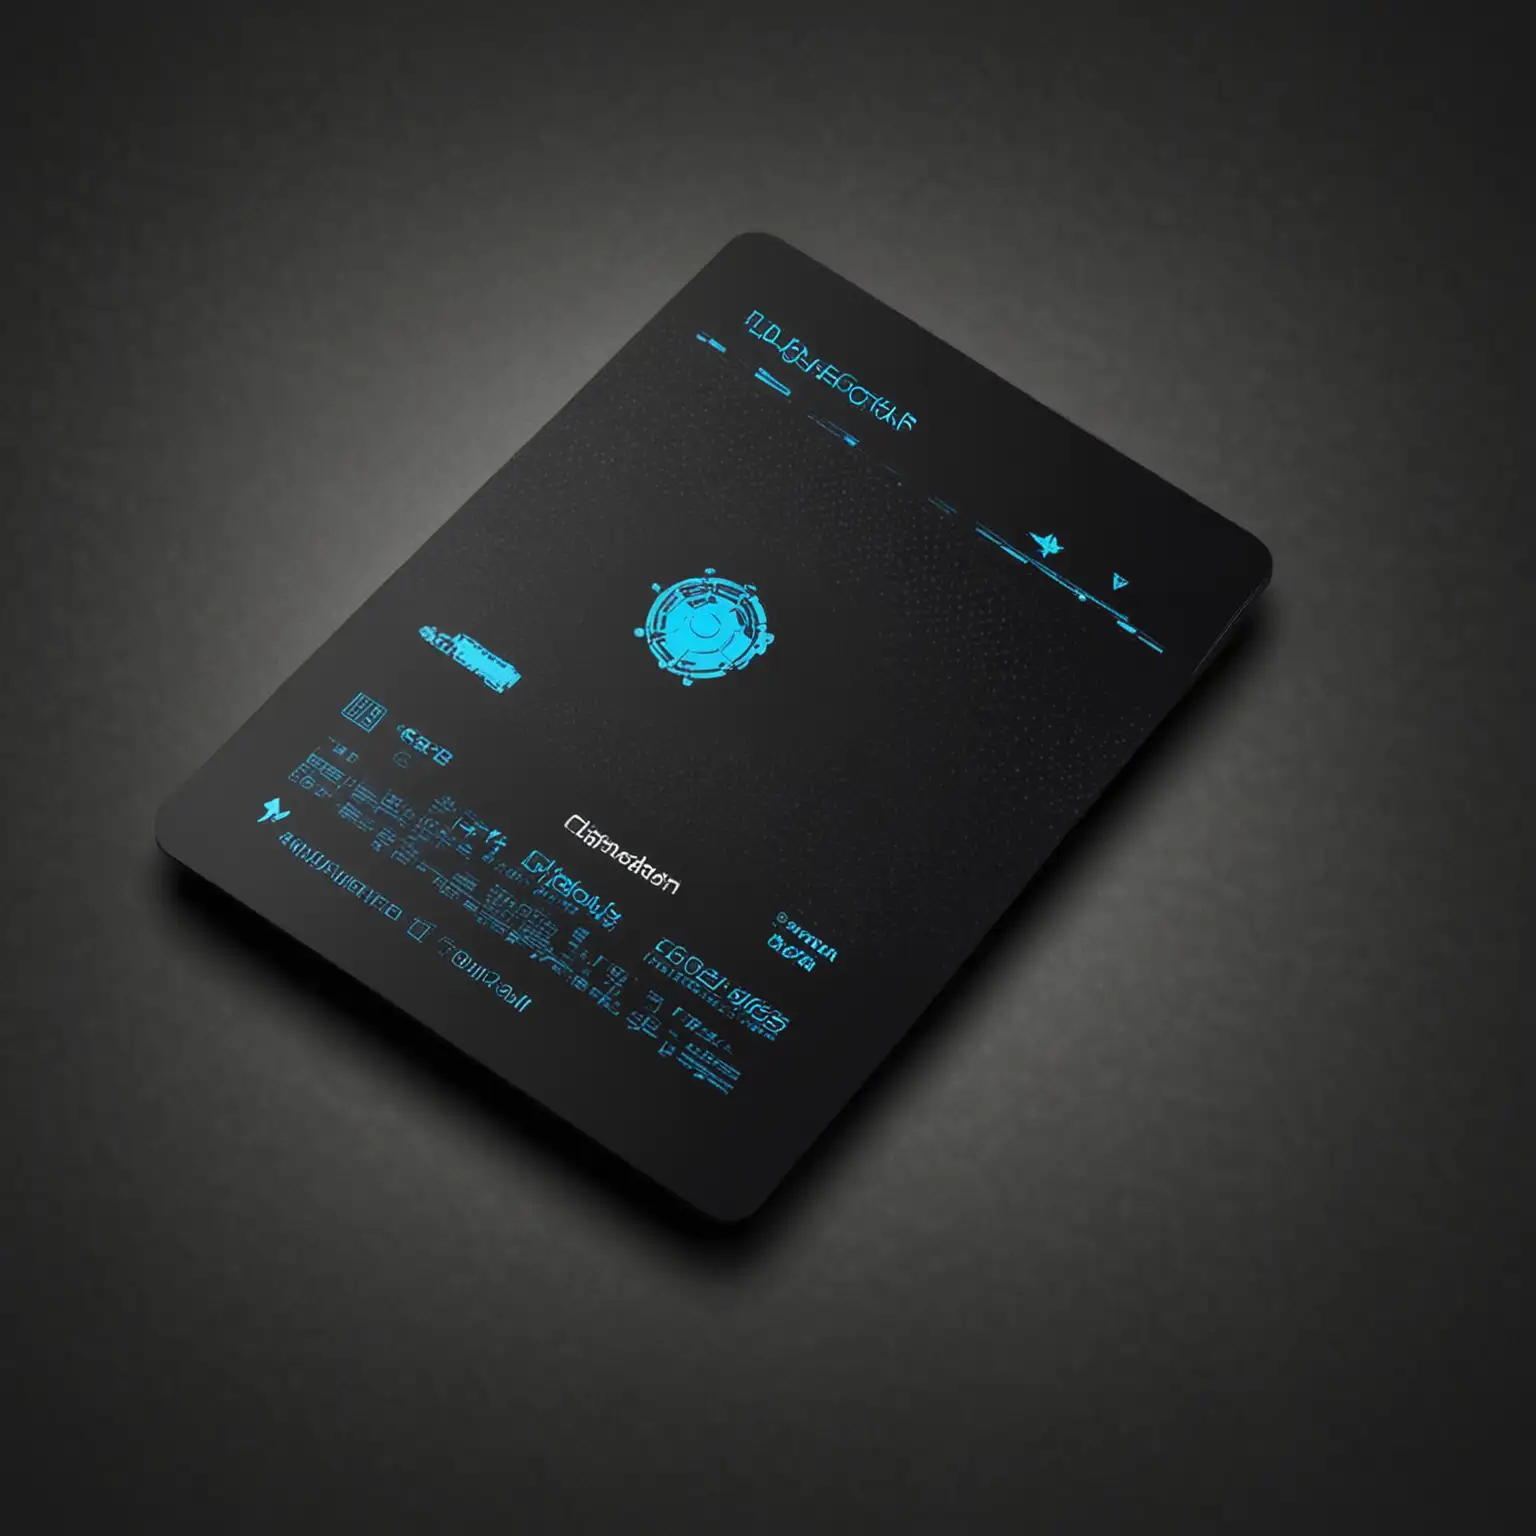 I need an image for a digital access card,  something modern, cool looking and slick
Make sure the color scheme is dark and edgy
Add some futuristic elements to it